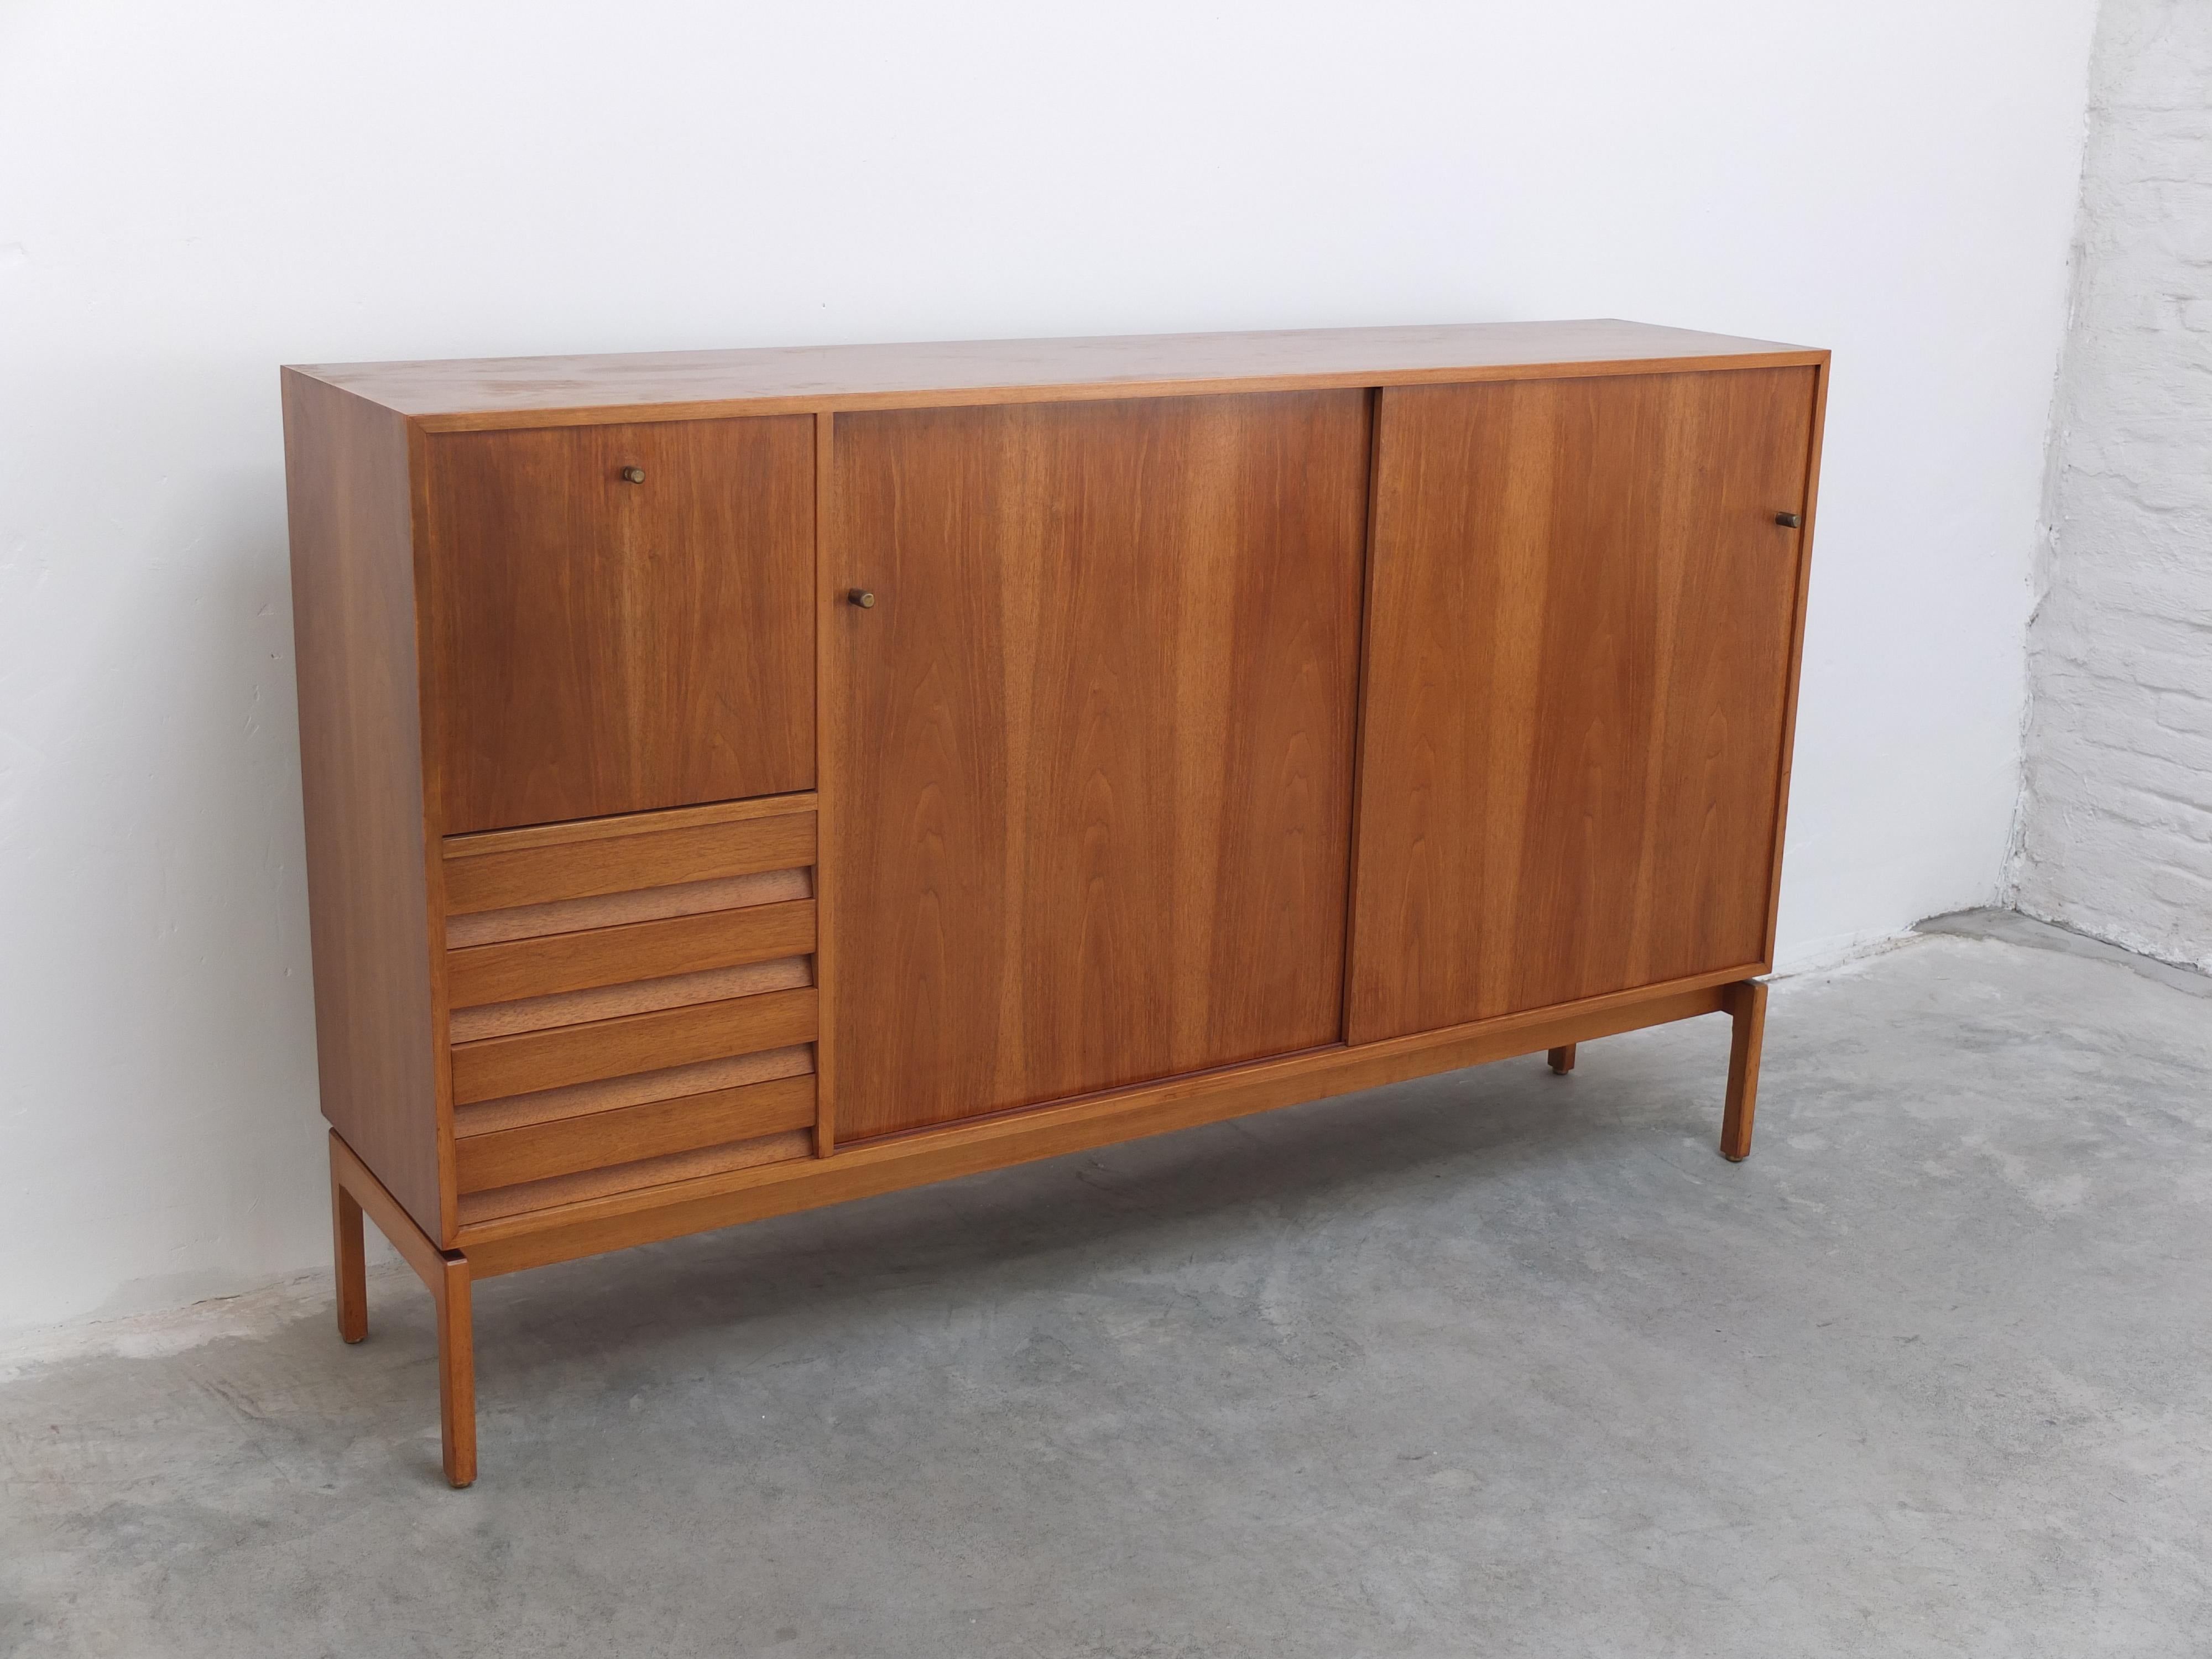 Walnut cabinet with practical sliding doors from the ‘Abstracta’ series designed by Jos De Mey for Van Den Berghe-Pauvers during the 1960s. The beautiful wood grain combined with the signature drawers and brass pulls make this a highly decorative